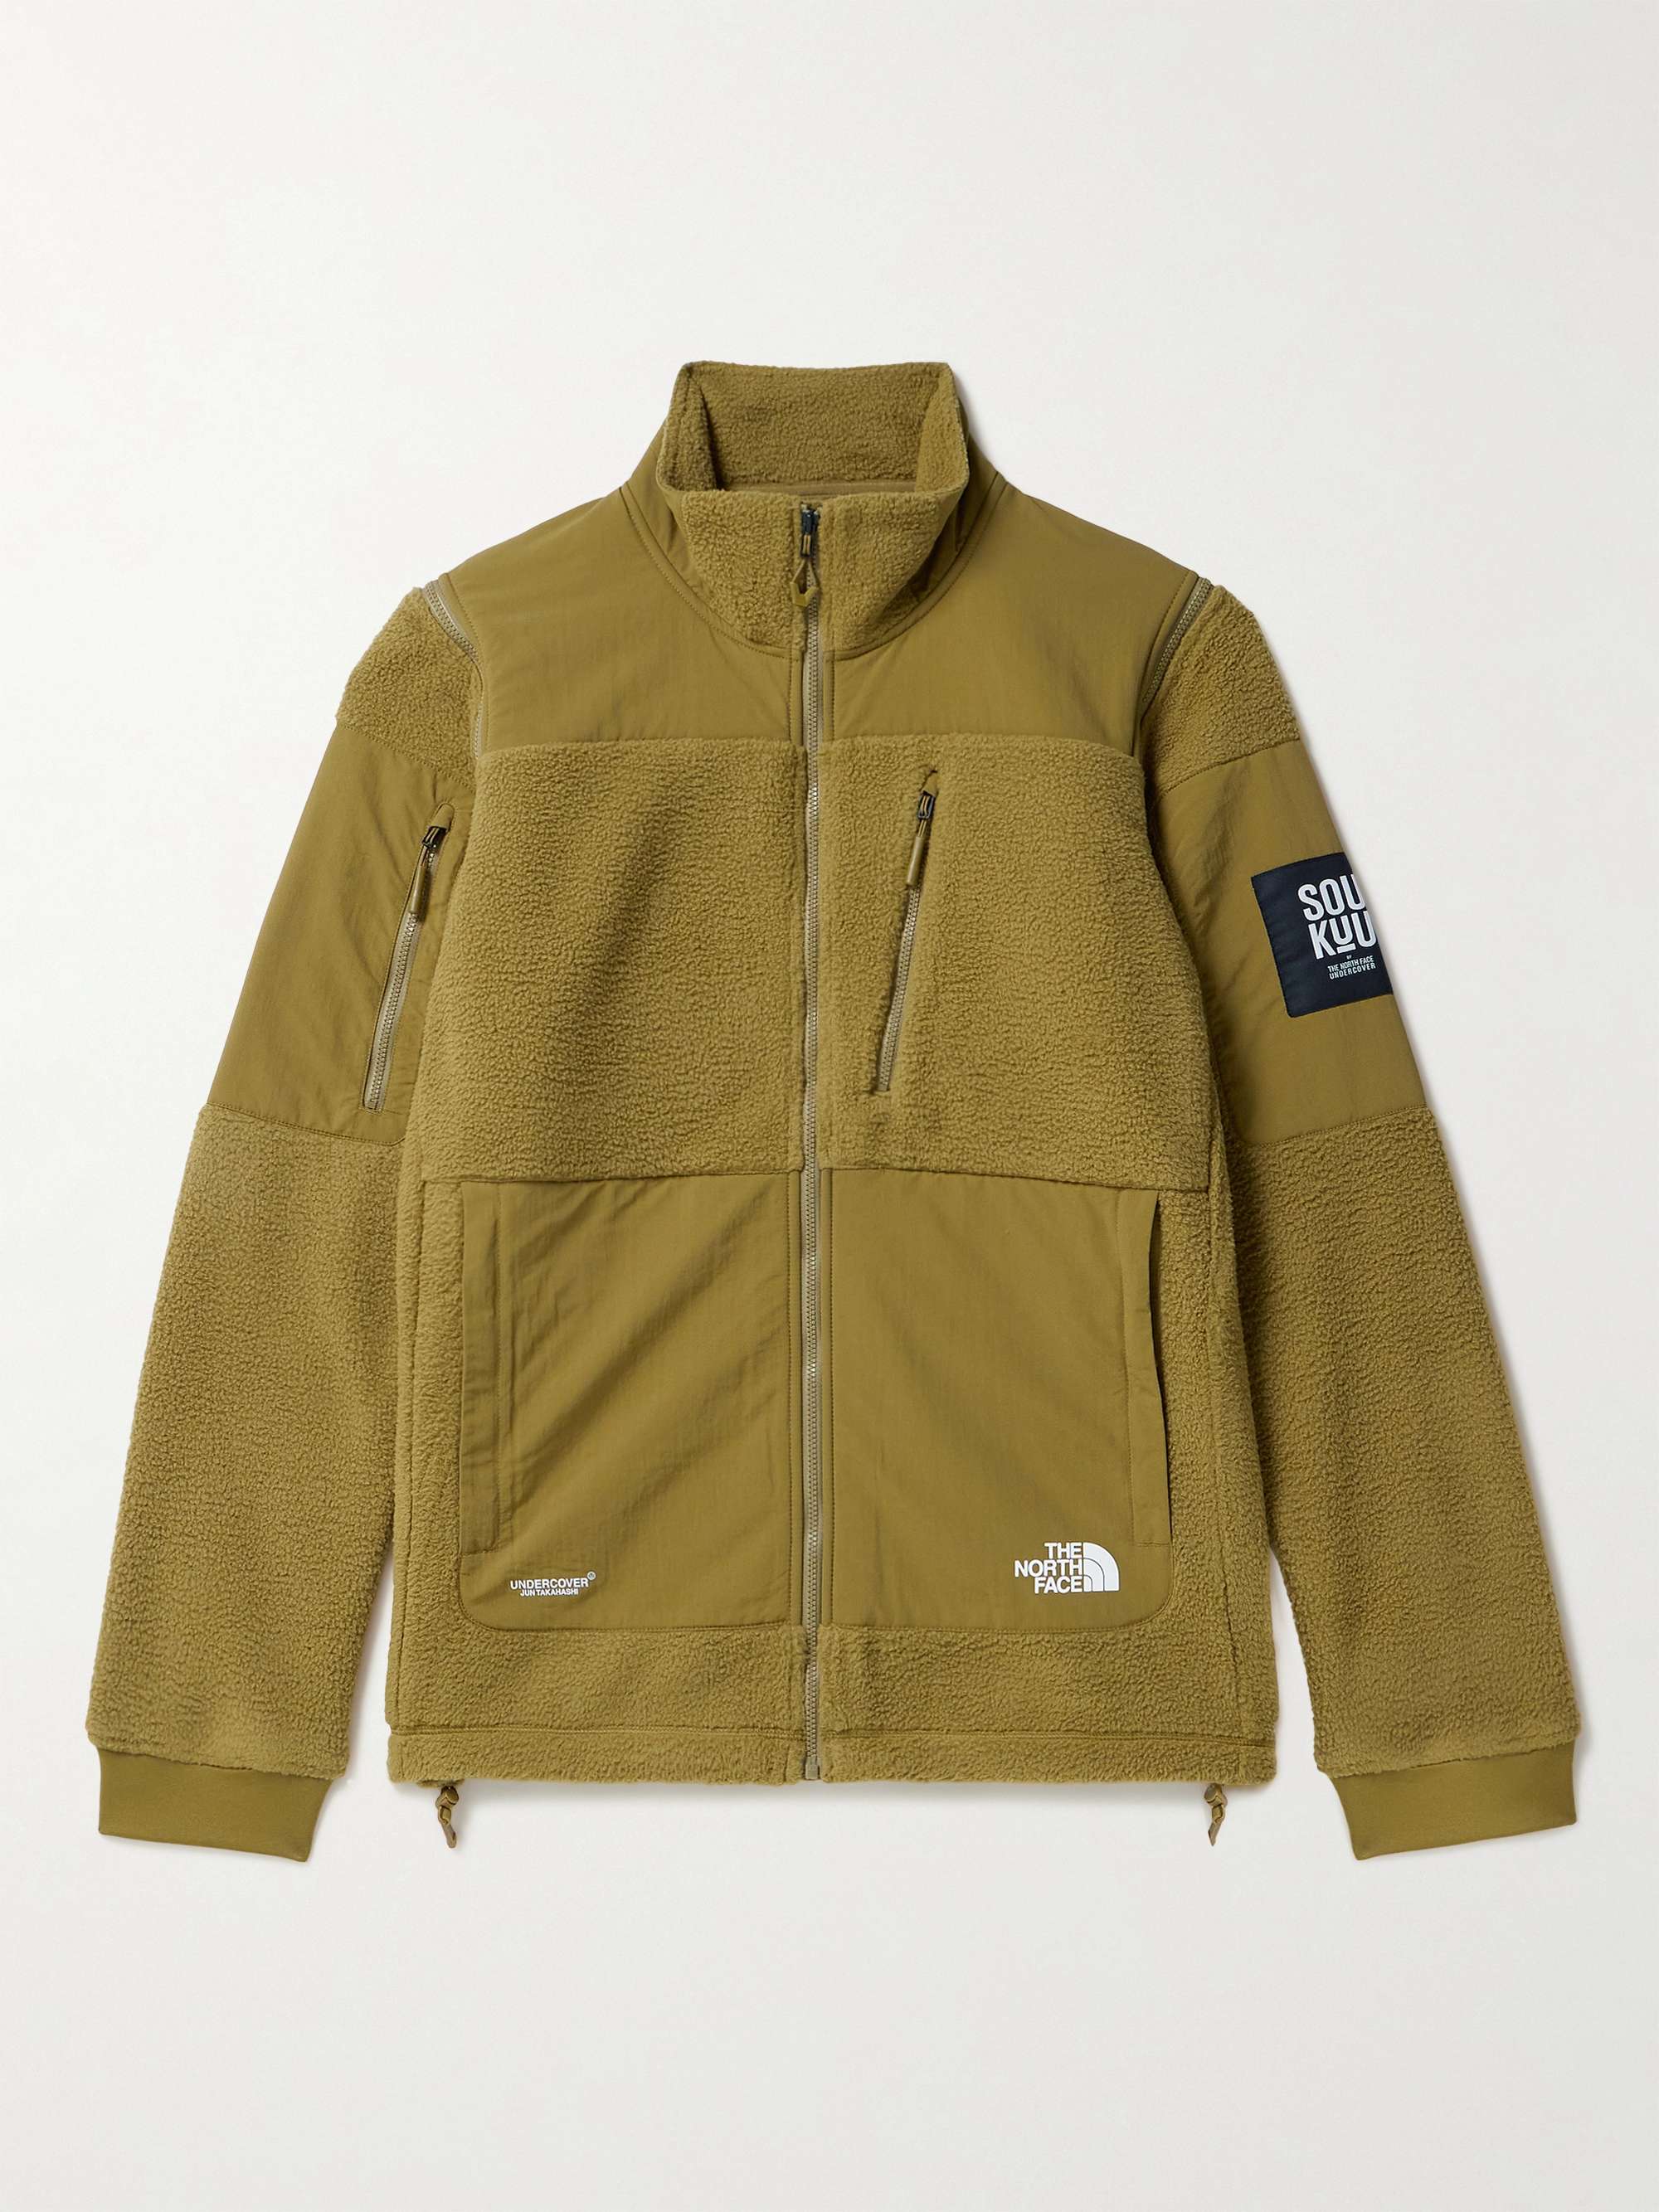 UNDERCOVER THE NORTH FACE  Fleece Jacket